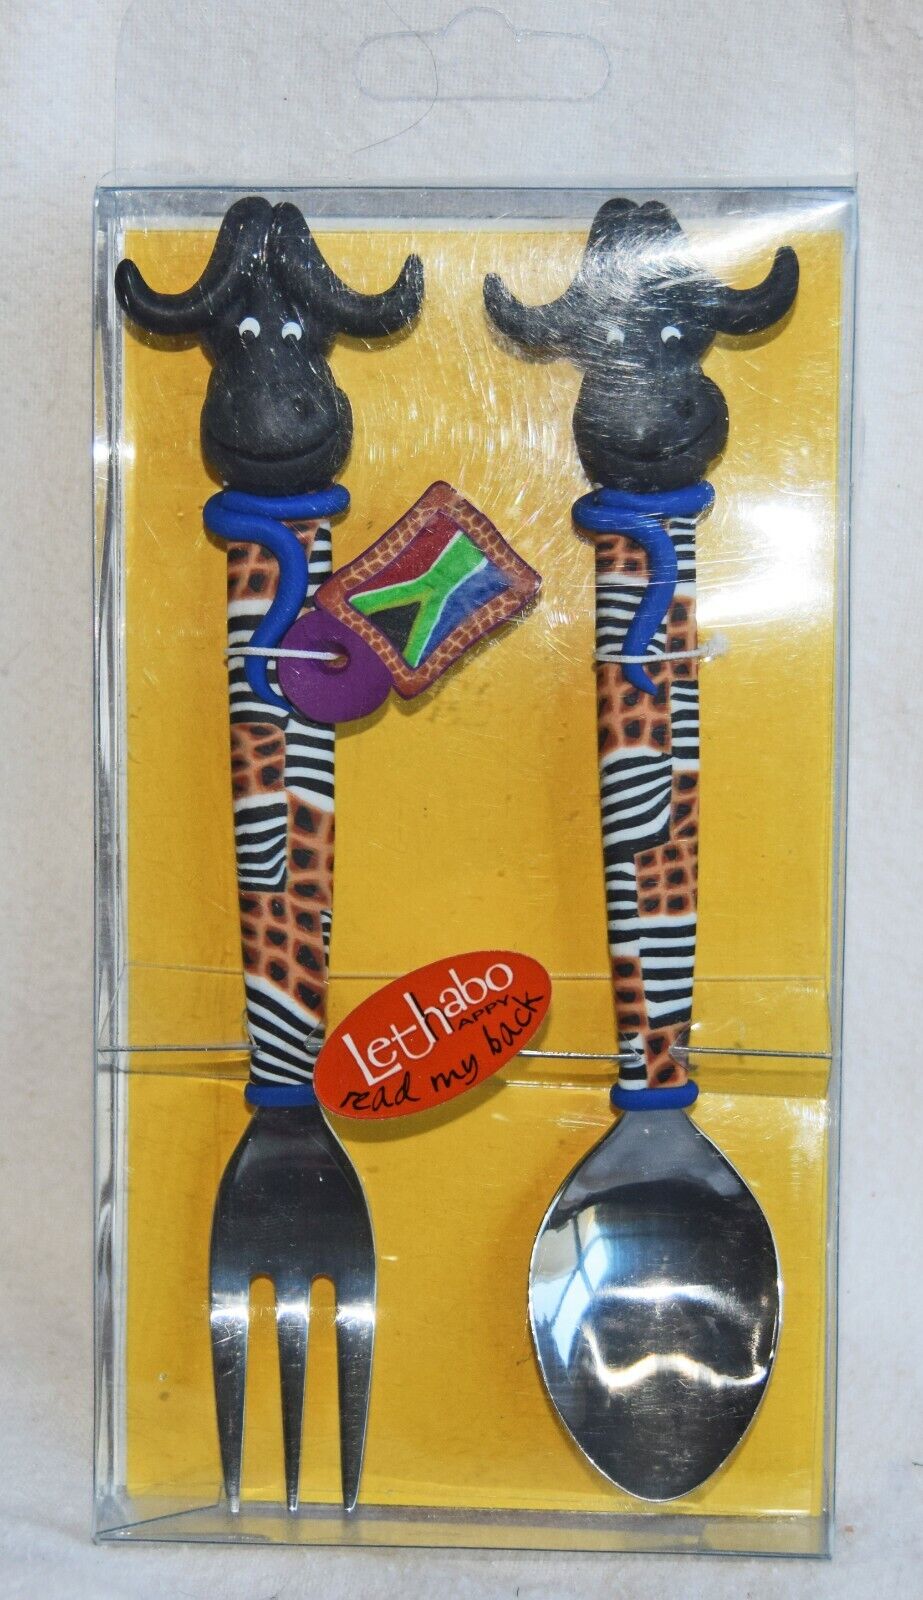 Original South Africa-lethabo Child Cutlery Set- African Art Handle-new Orig Box